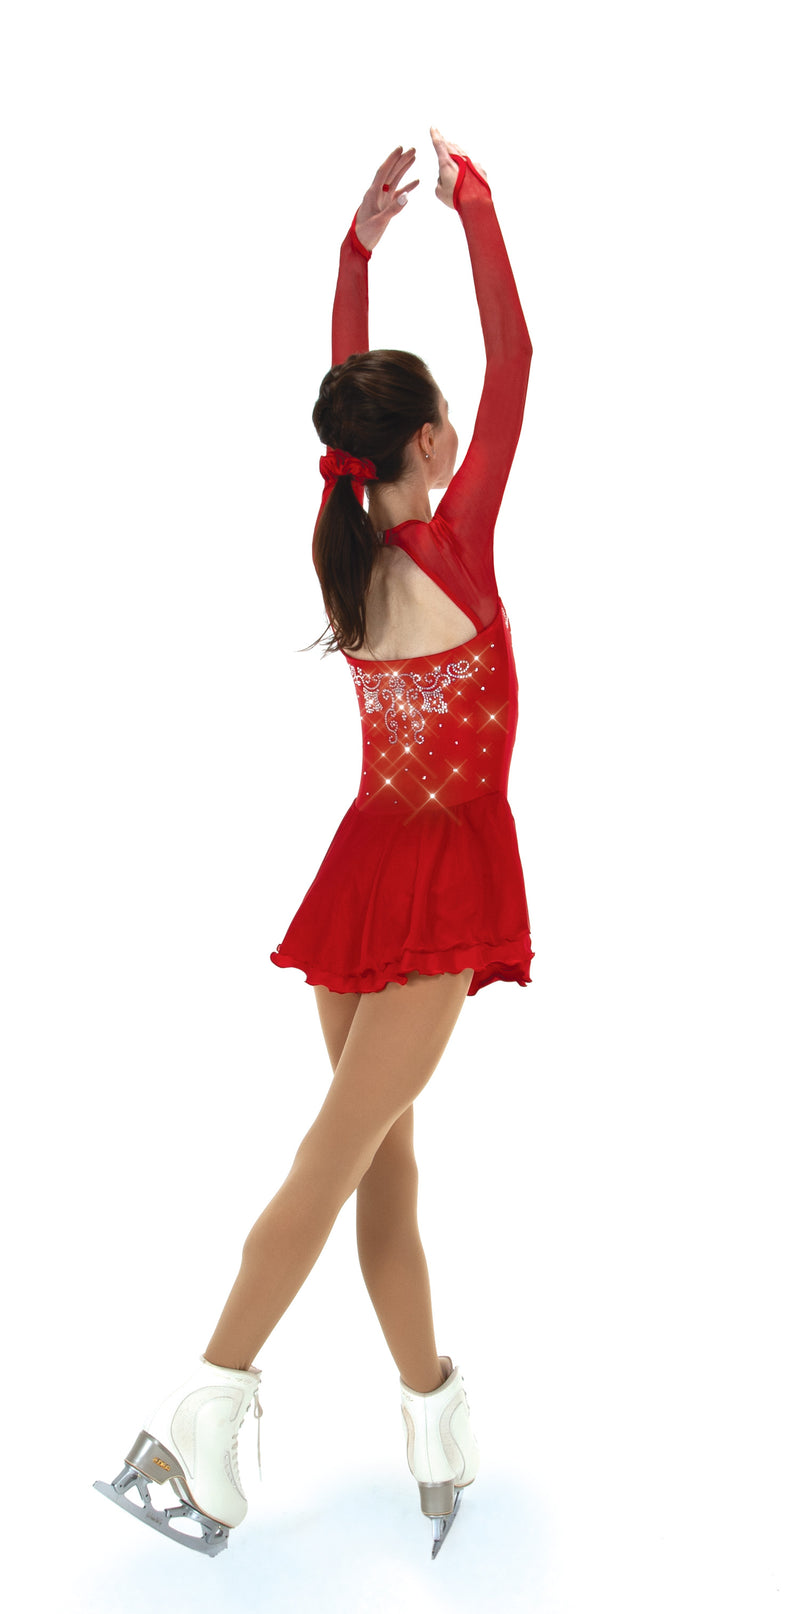 JRF22007-R Robe de patinage artistique Solitaire Sweetheart Rouge